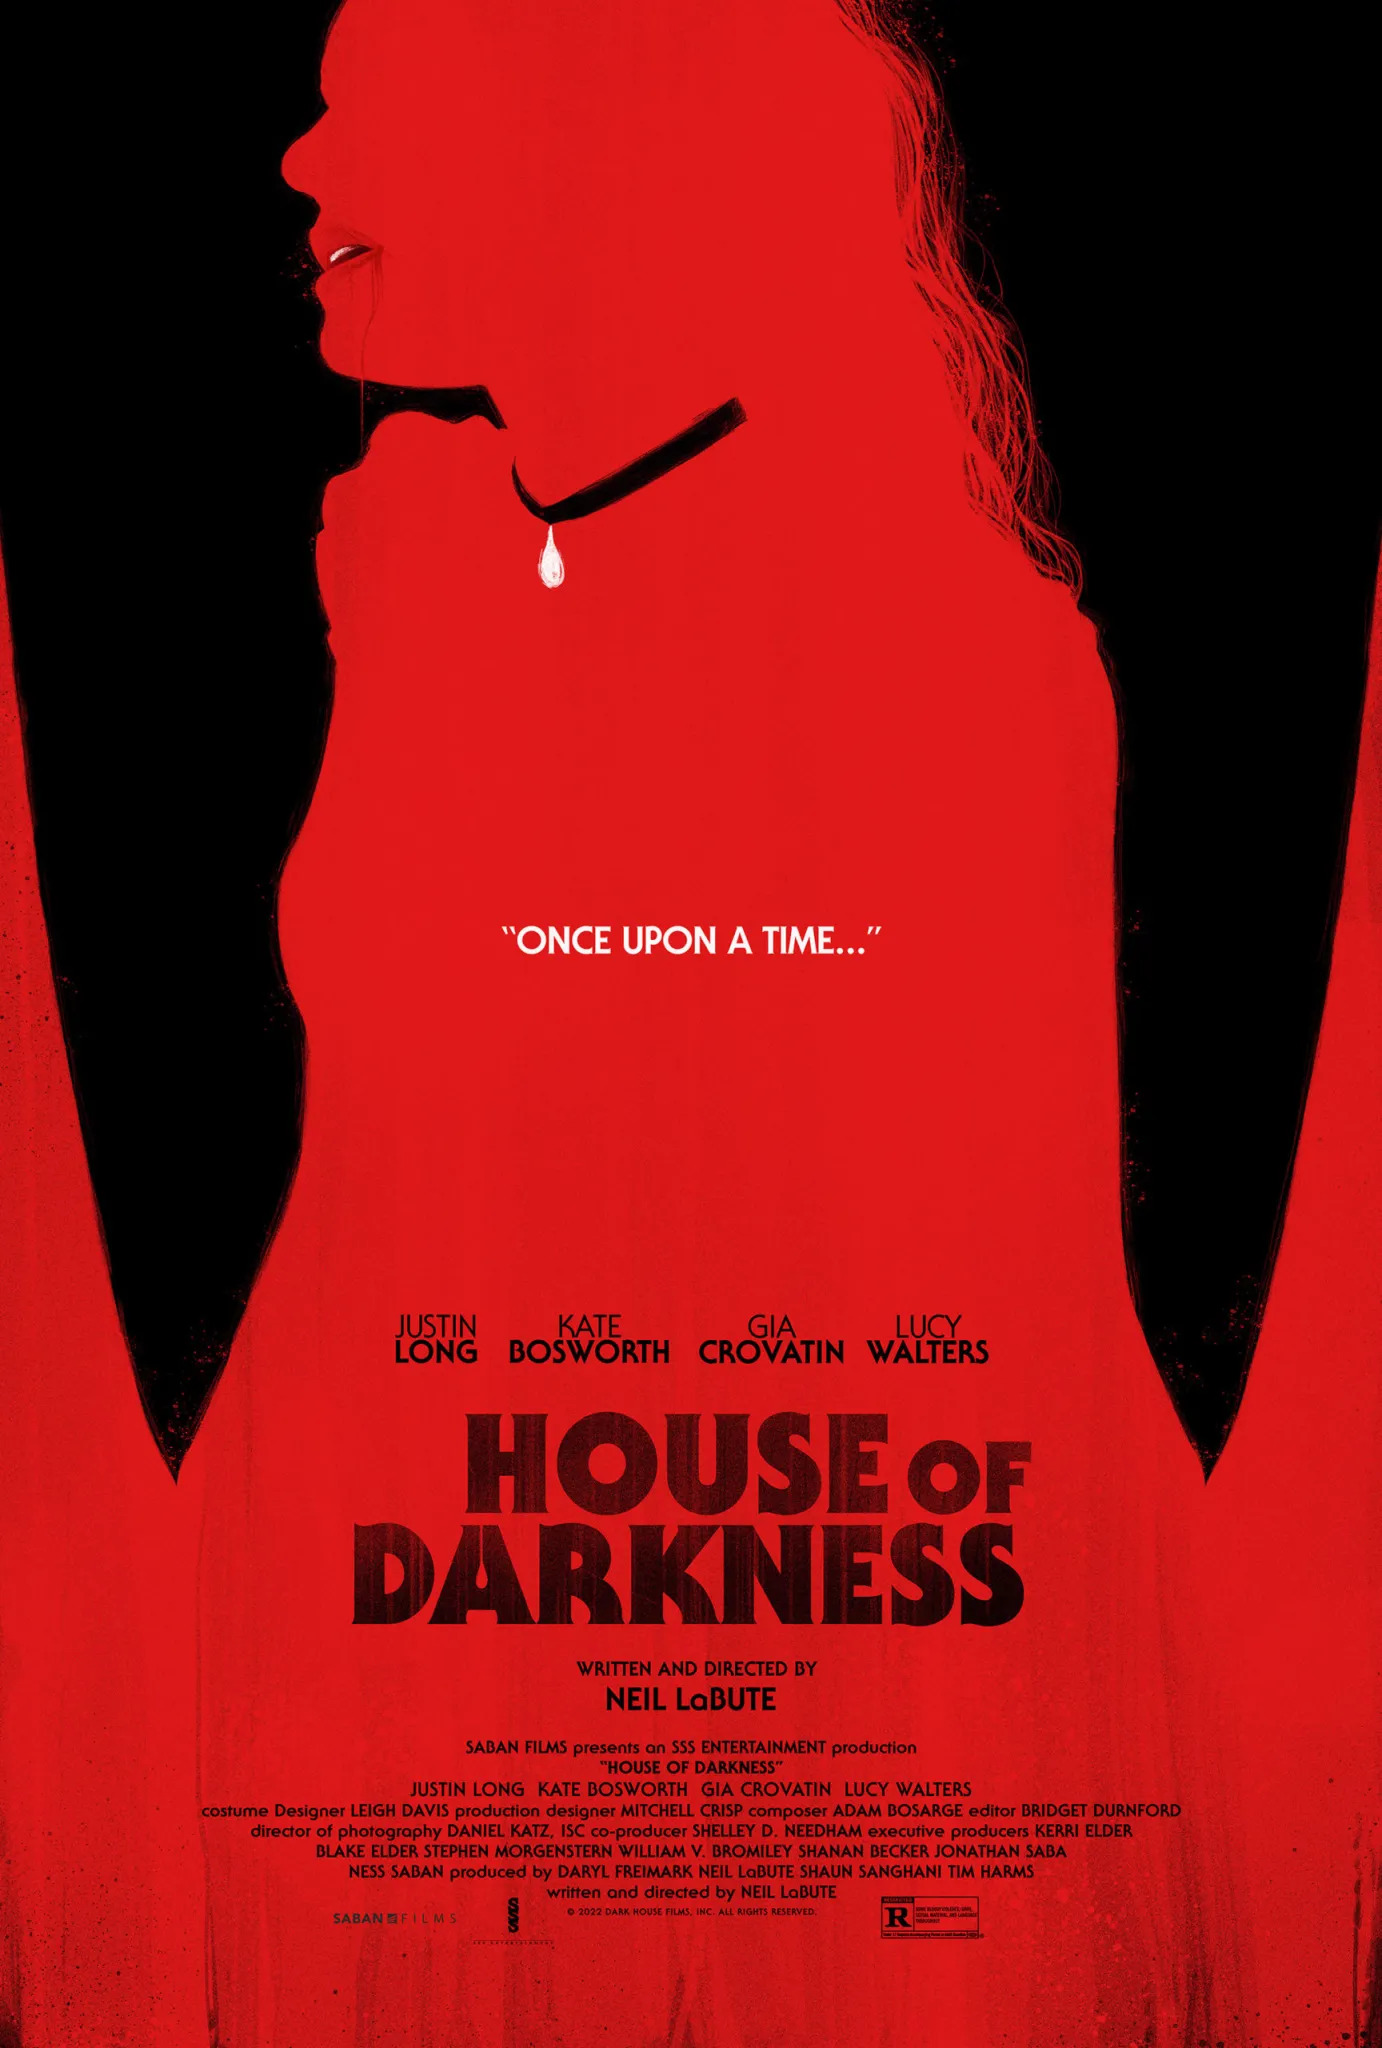 House of Darkness Trailer & Poster